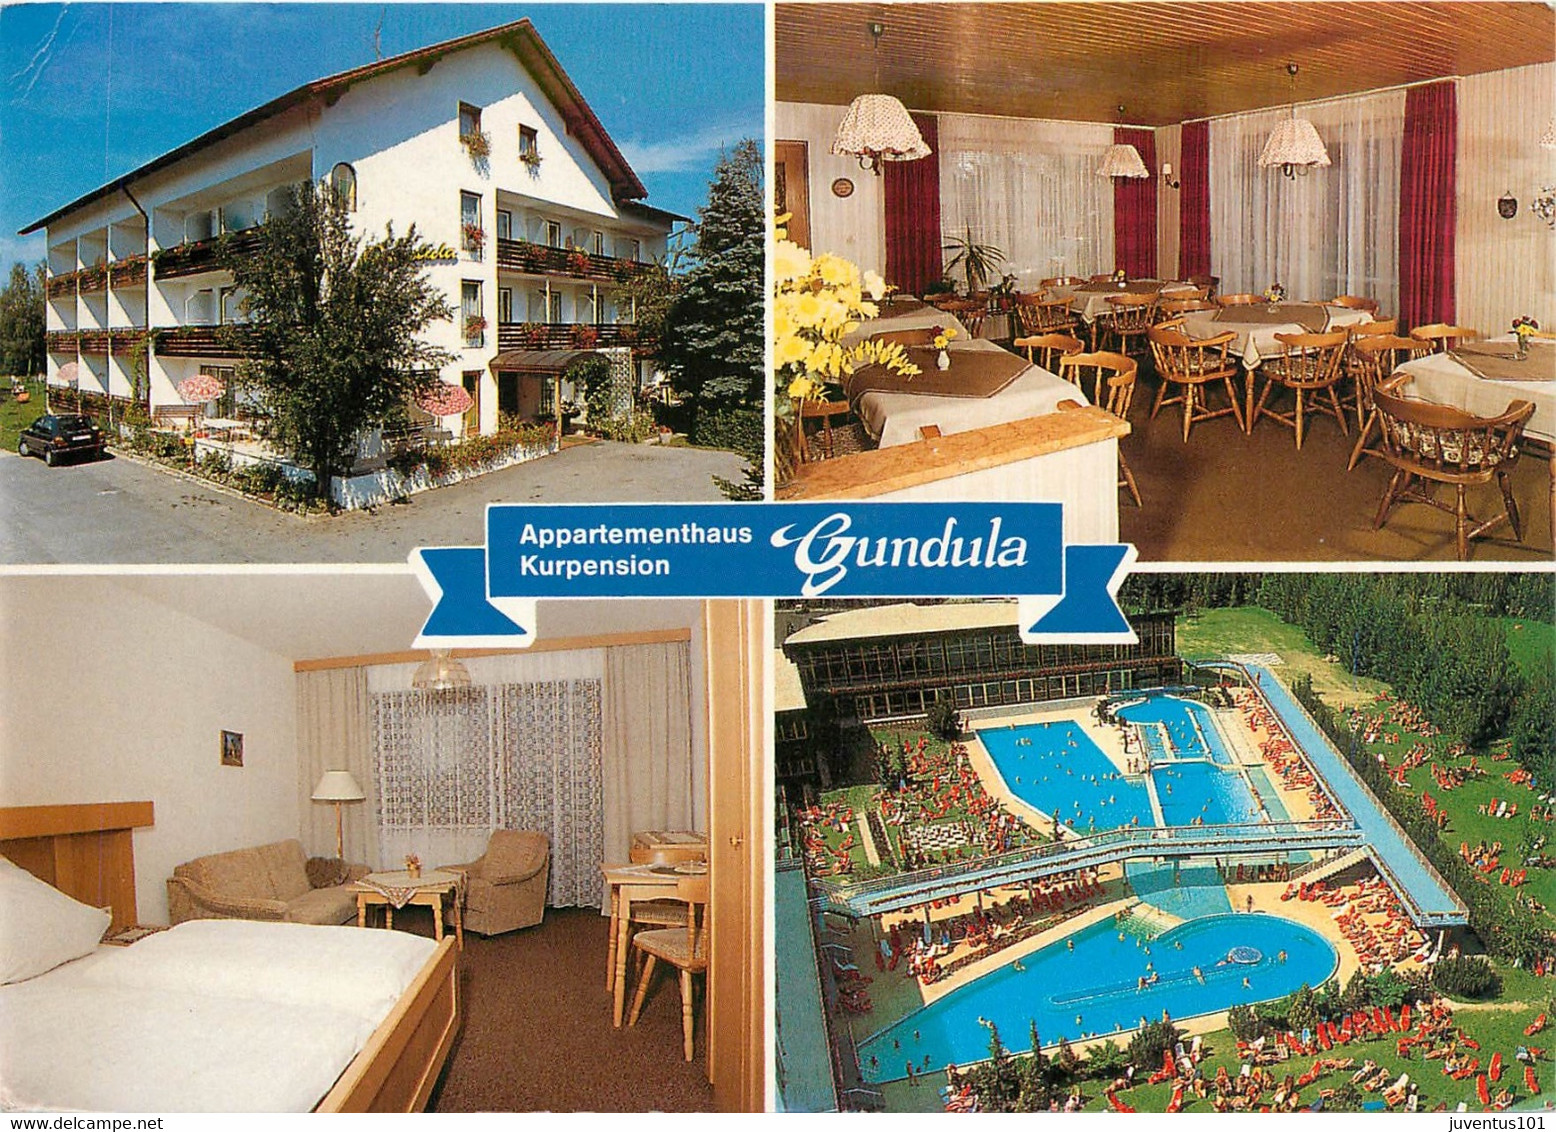 CPSM Bad Füssing-Appartementhaus-Kurpension Gundula-Timbre    L1414 - Bad Fuessing